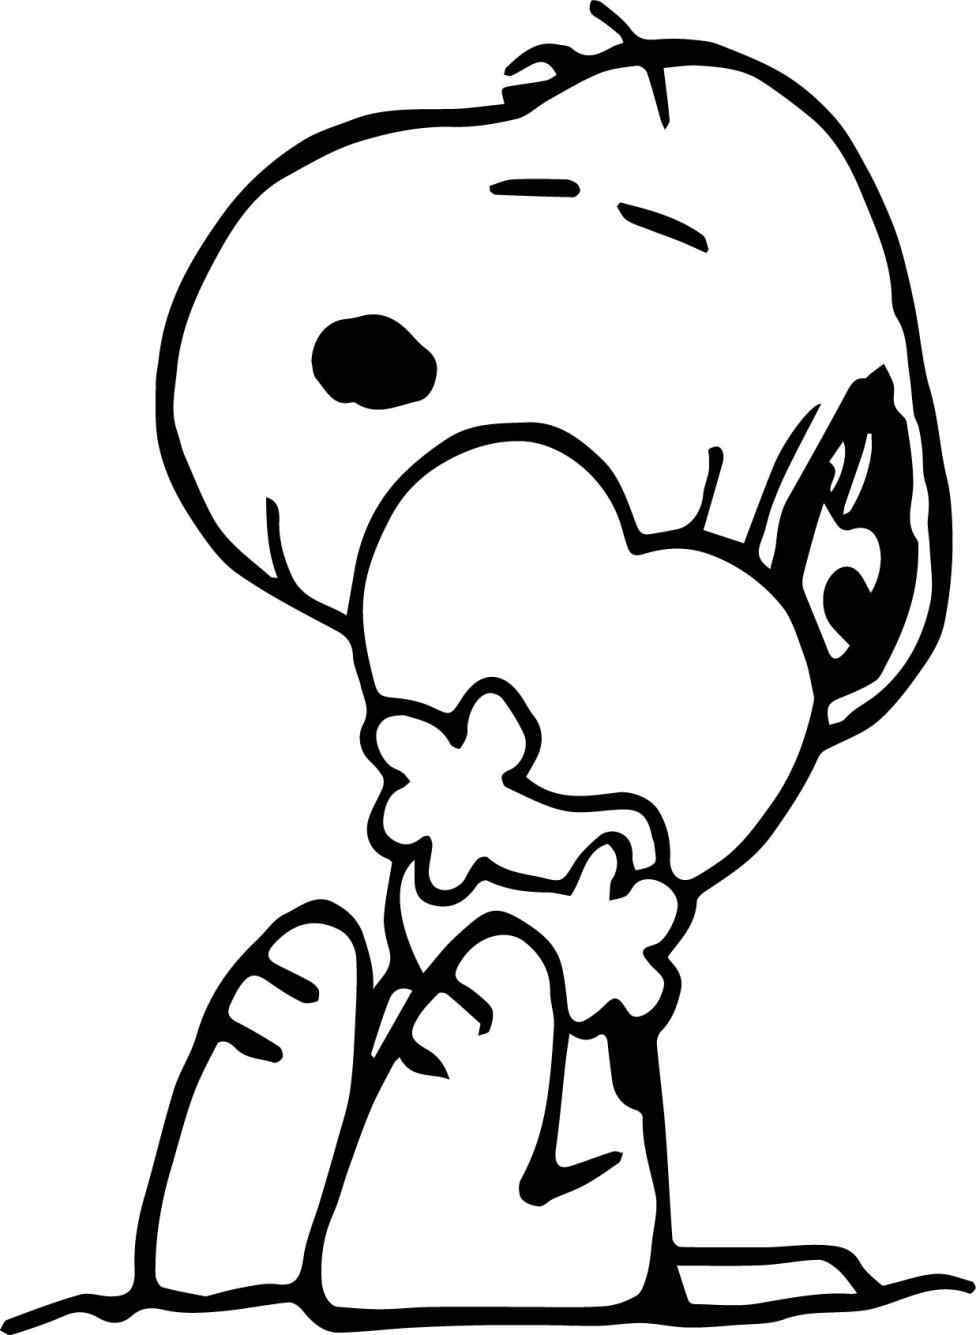 Snoopy Valentine Coloring Pages at GetColorings.com | Free printable